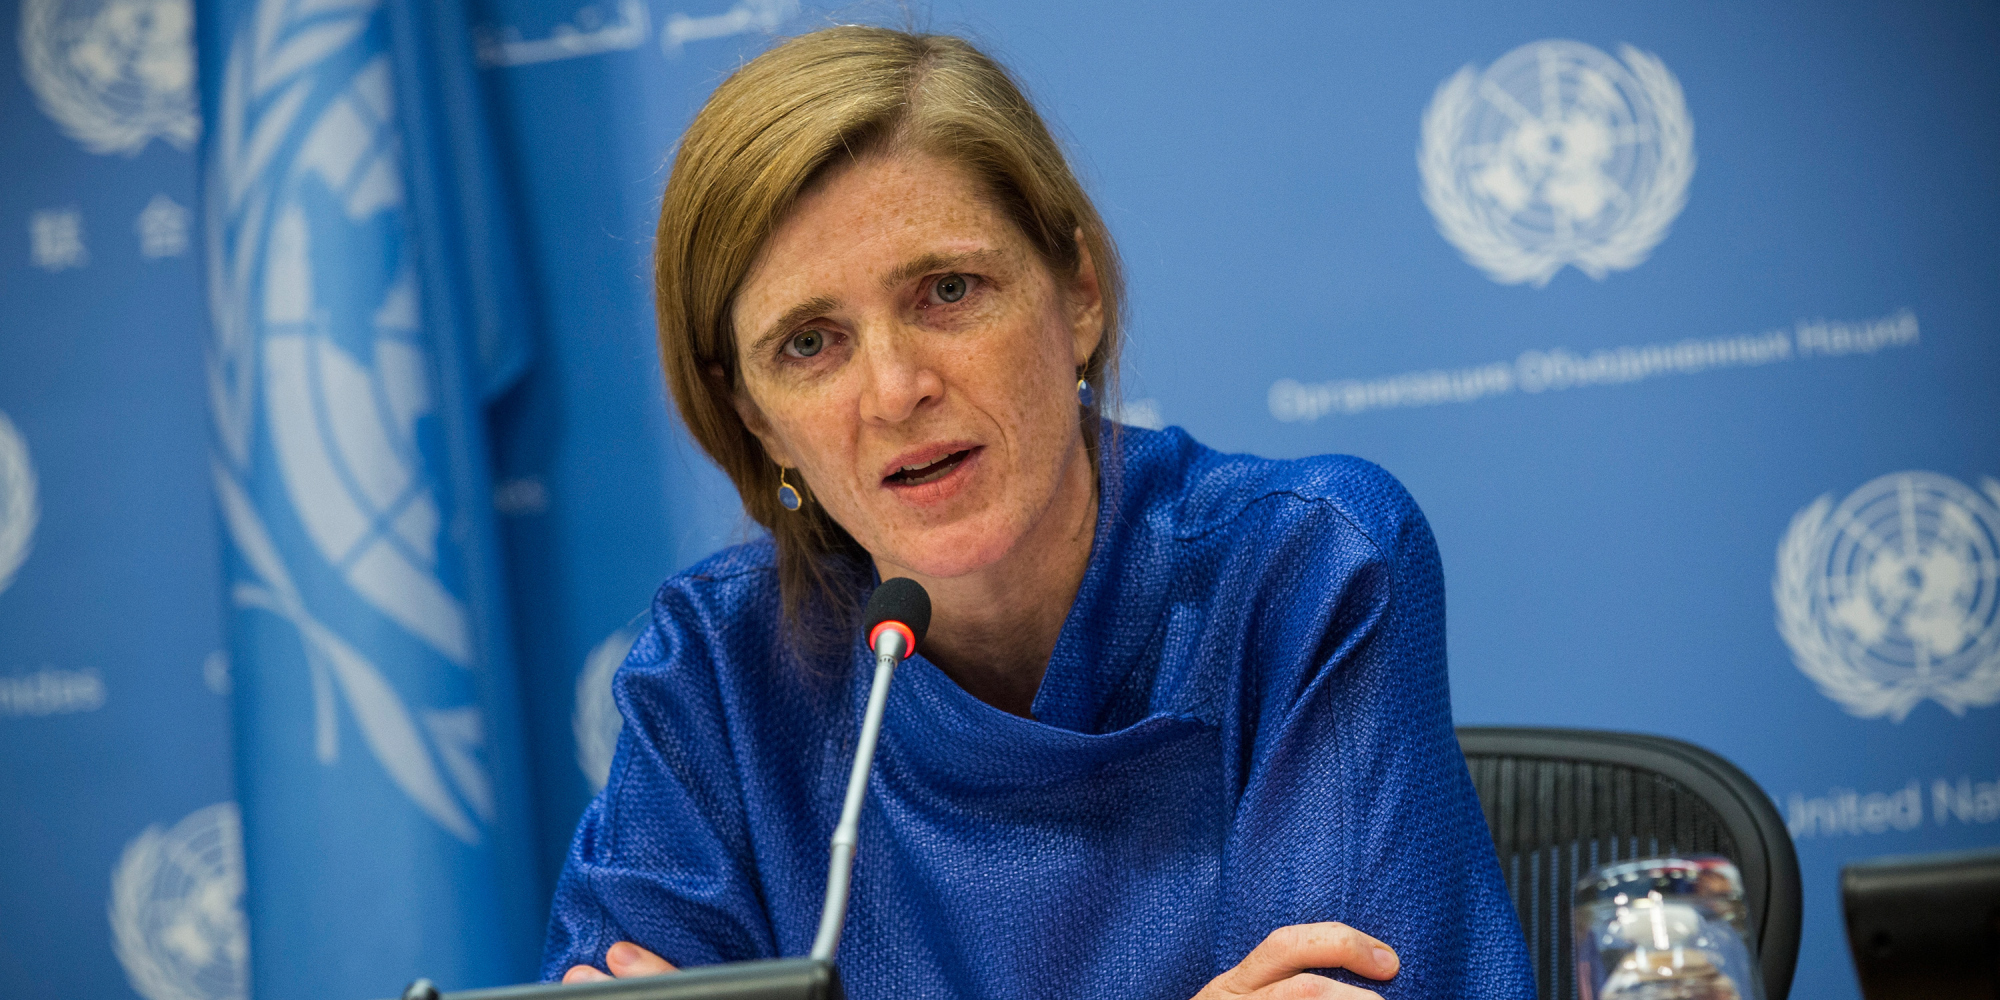 NEW YORK, NY - SEPTEMBER 03: United States Ambassador to the United Nations (U.N.) Samantha Power holds a press conference on September 3, 2014 in New York City. Power answered questions on foreign extremist Islamist fighters joining ISIS in Syria and Iraq and the most recent Israeli-Palestinian peace deal, amongst other topics. (Photo by Andrew Burton/Getty Images)